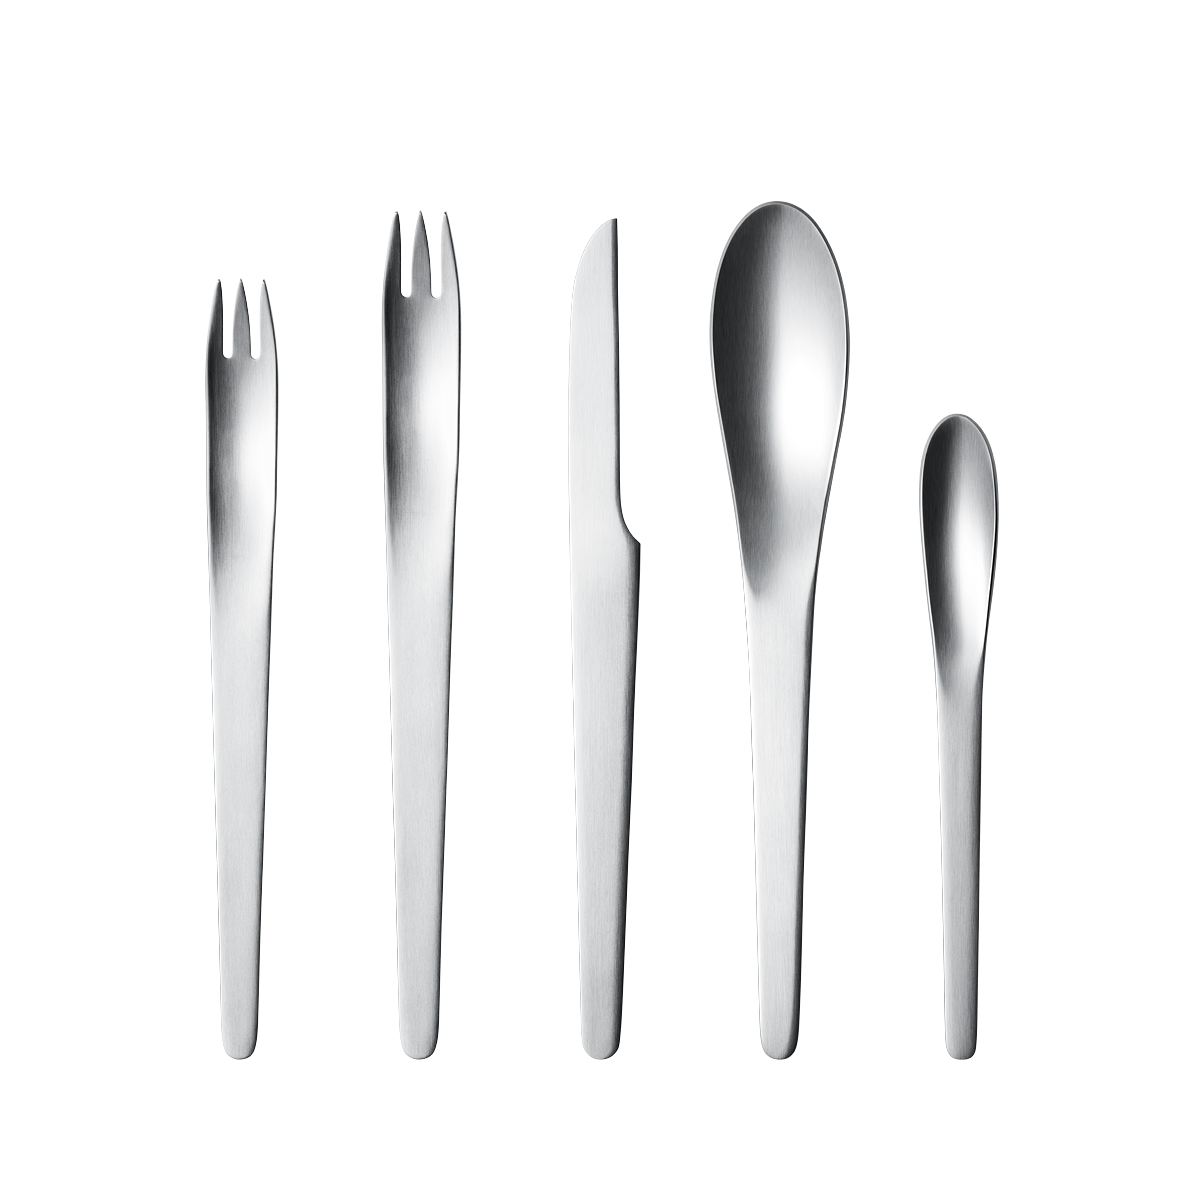 Arne Jacobsen by Georg Jensen Stainless Steel Service for 12 Set 60 pieces - New - $1,057.32